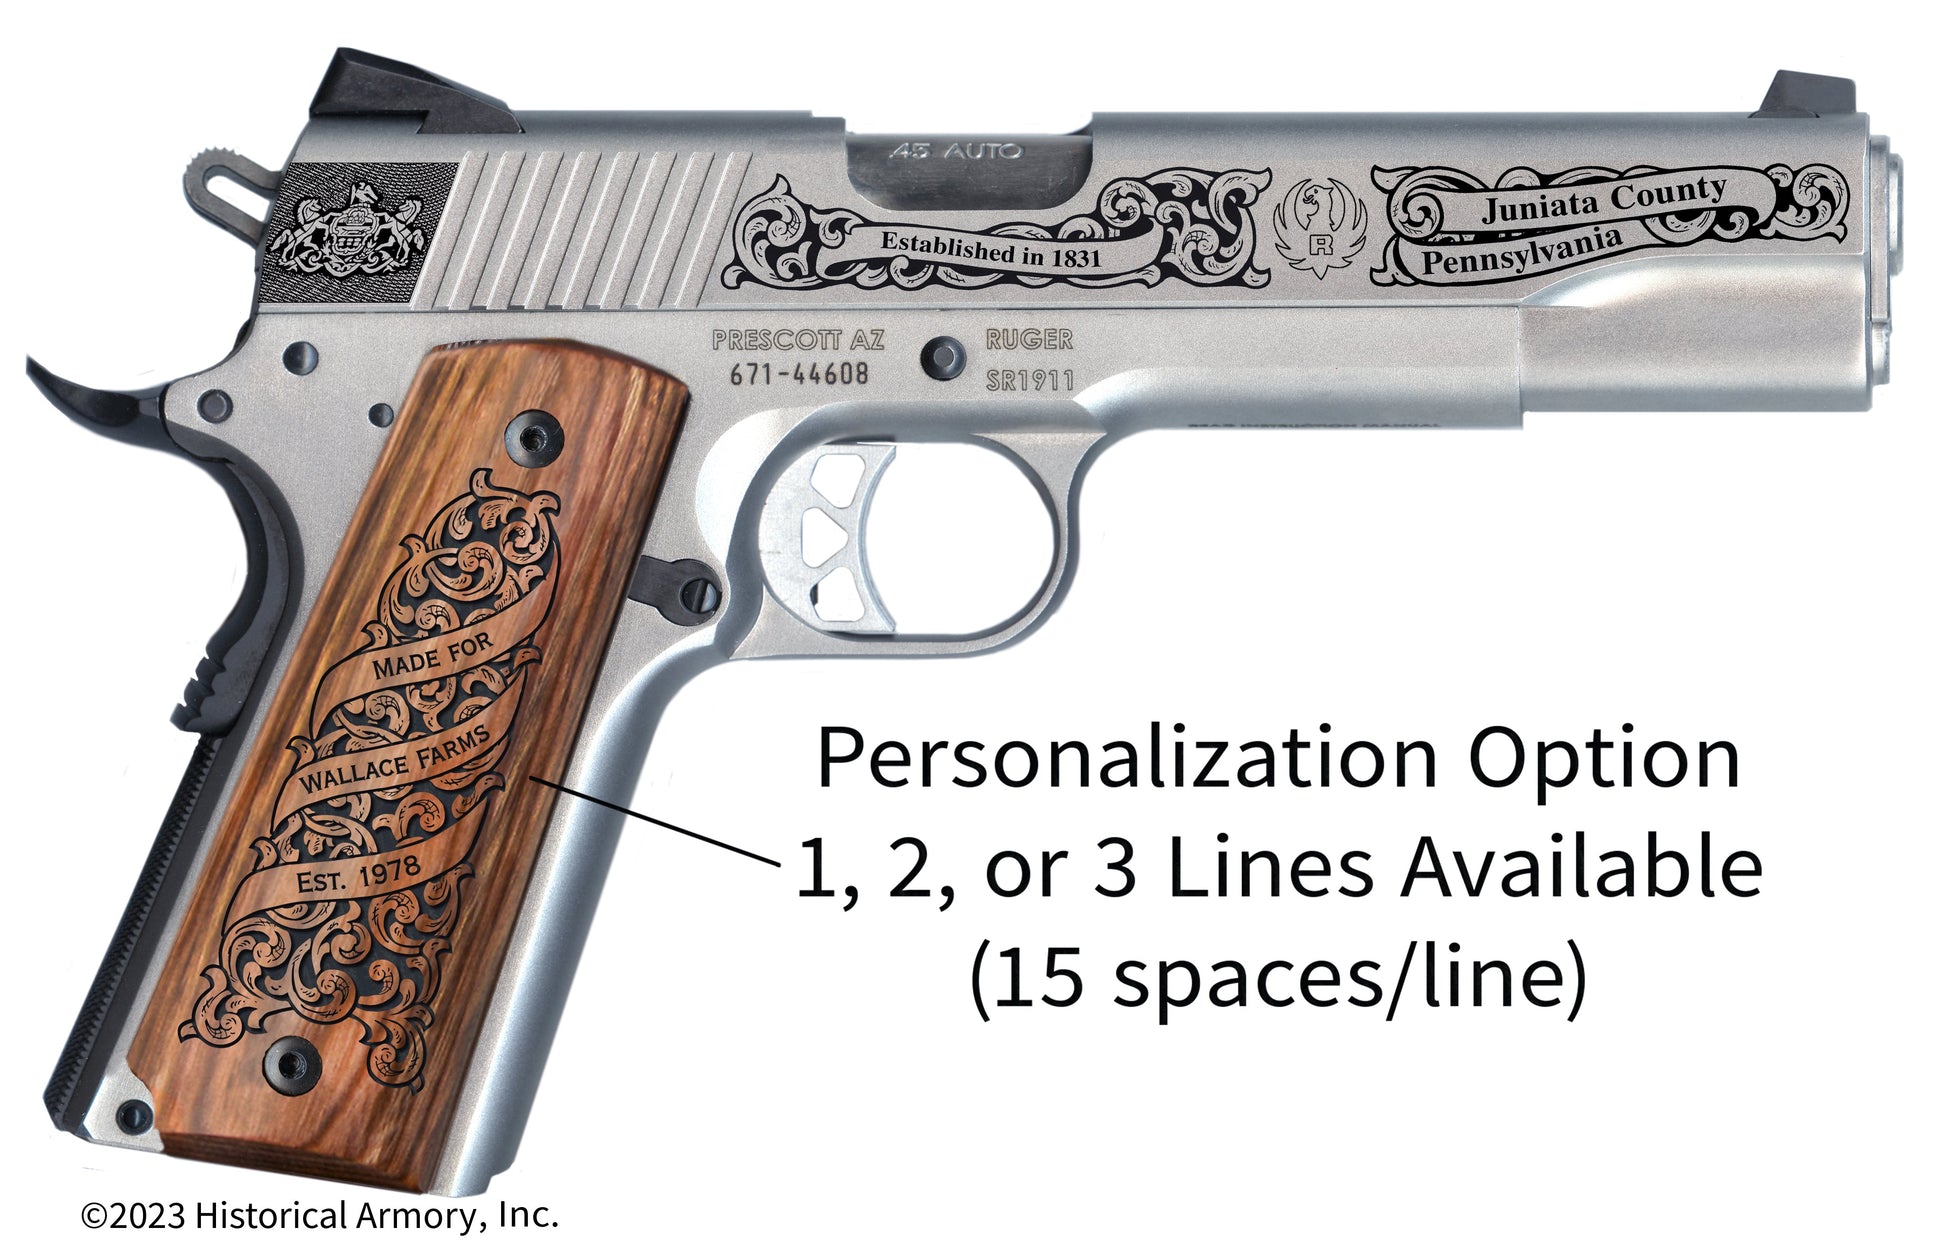 Juniata County Pennsylvania Personalized Engraved .45 Auto Ruger 1911